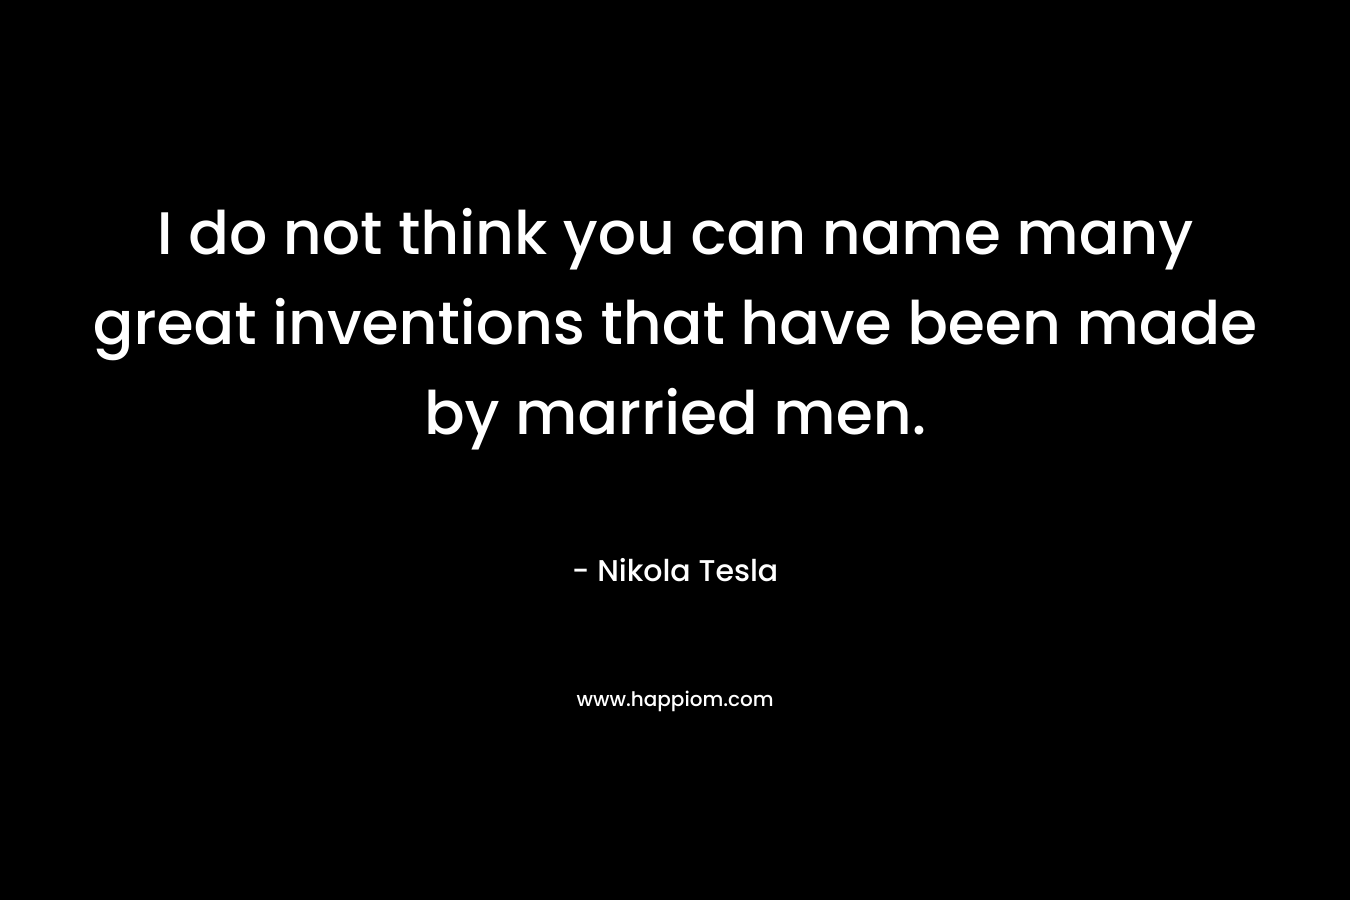 I do not think you can name many great inventions that have been made by married men.